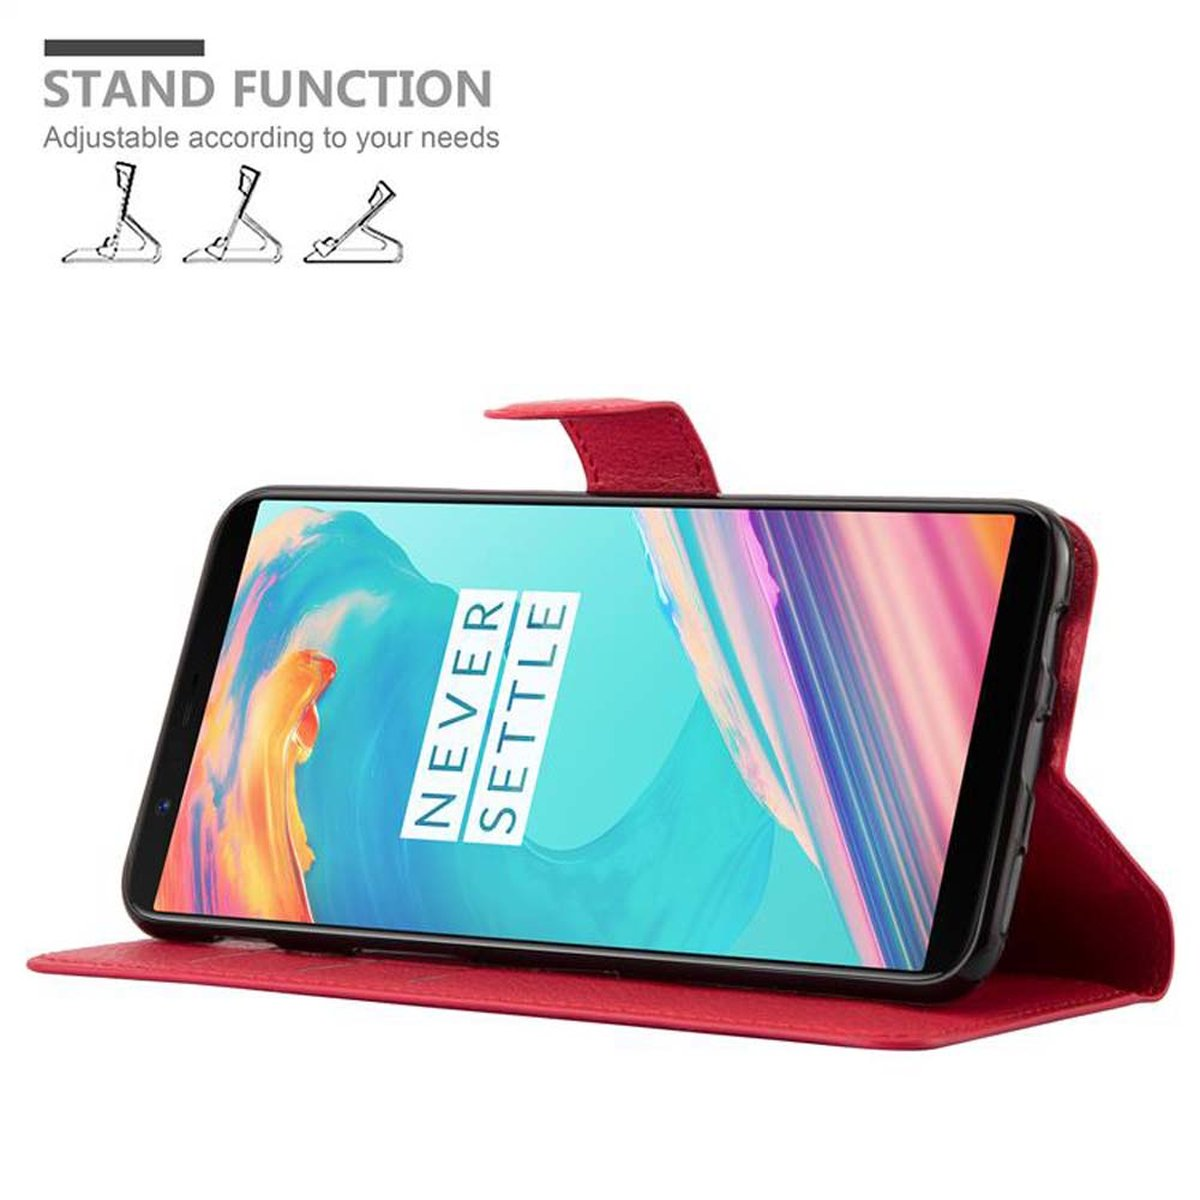 OnePlus, Standfunktion, ROT 5T, KARMIN Bookcover, Book Hülle CADORABO